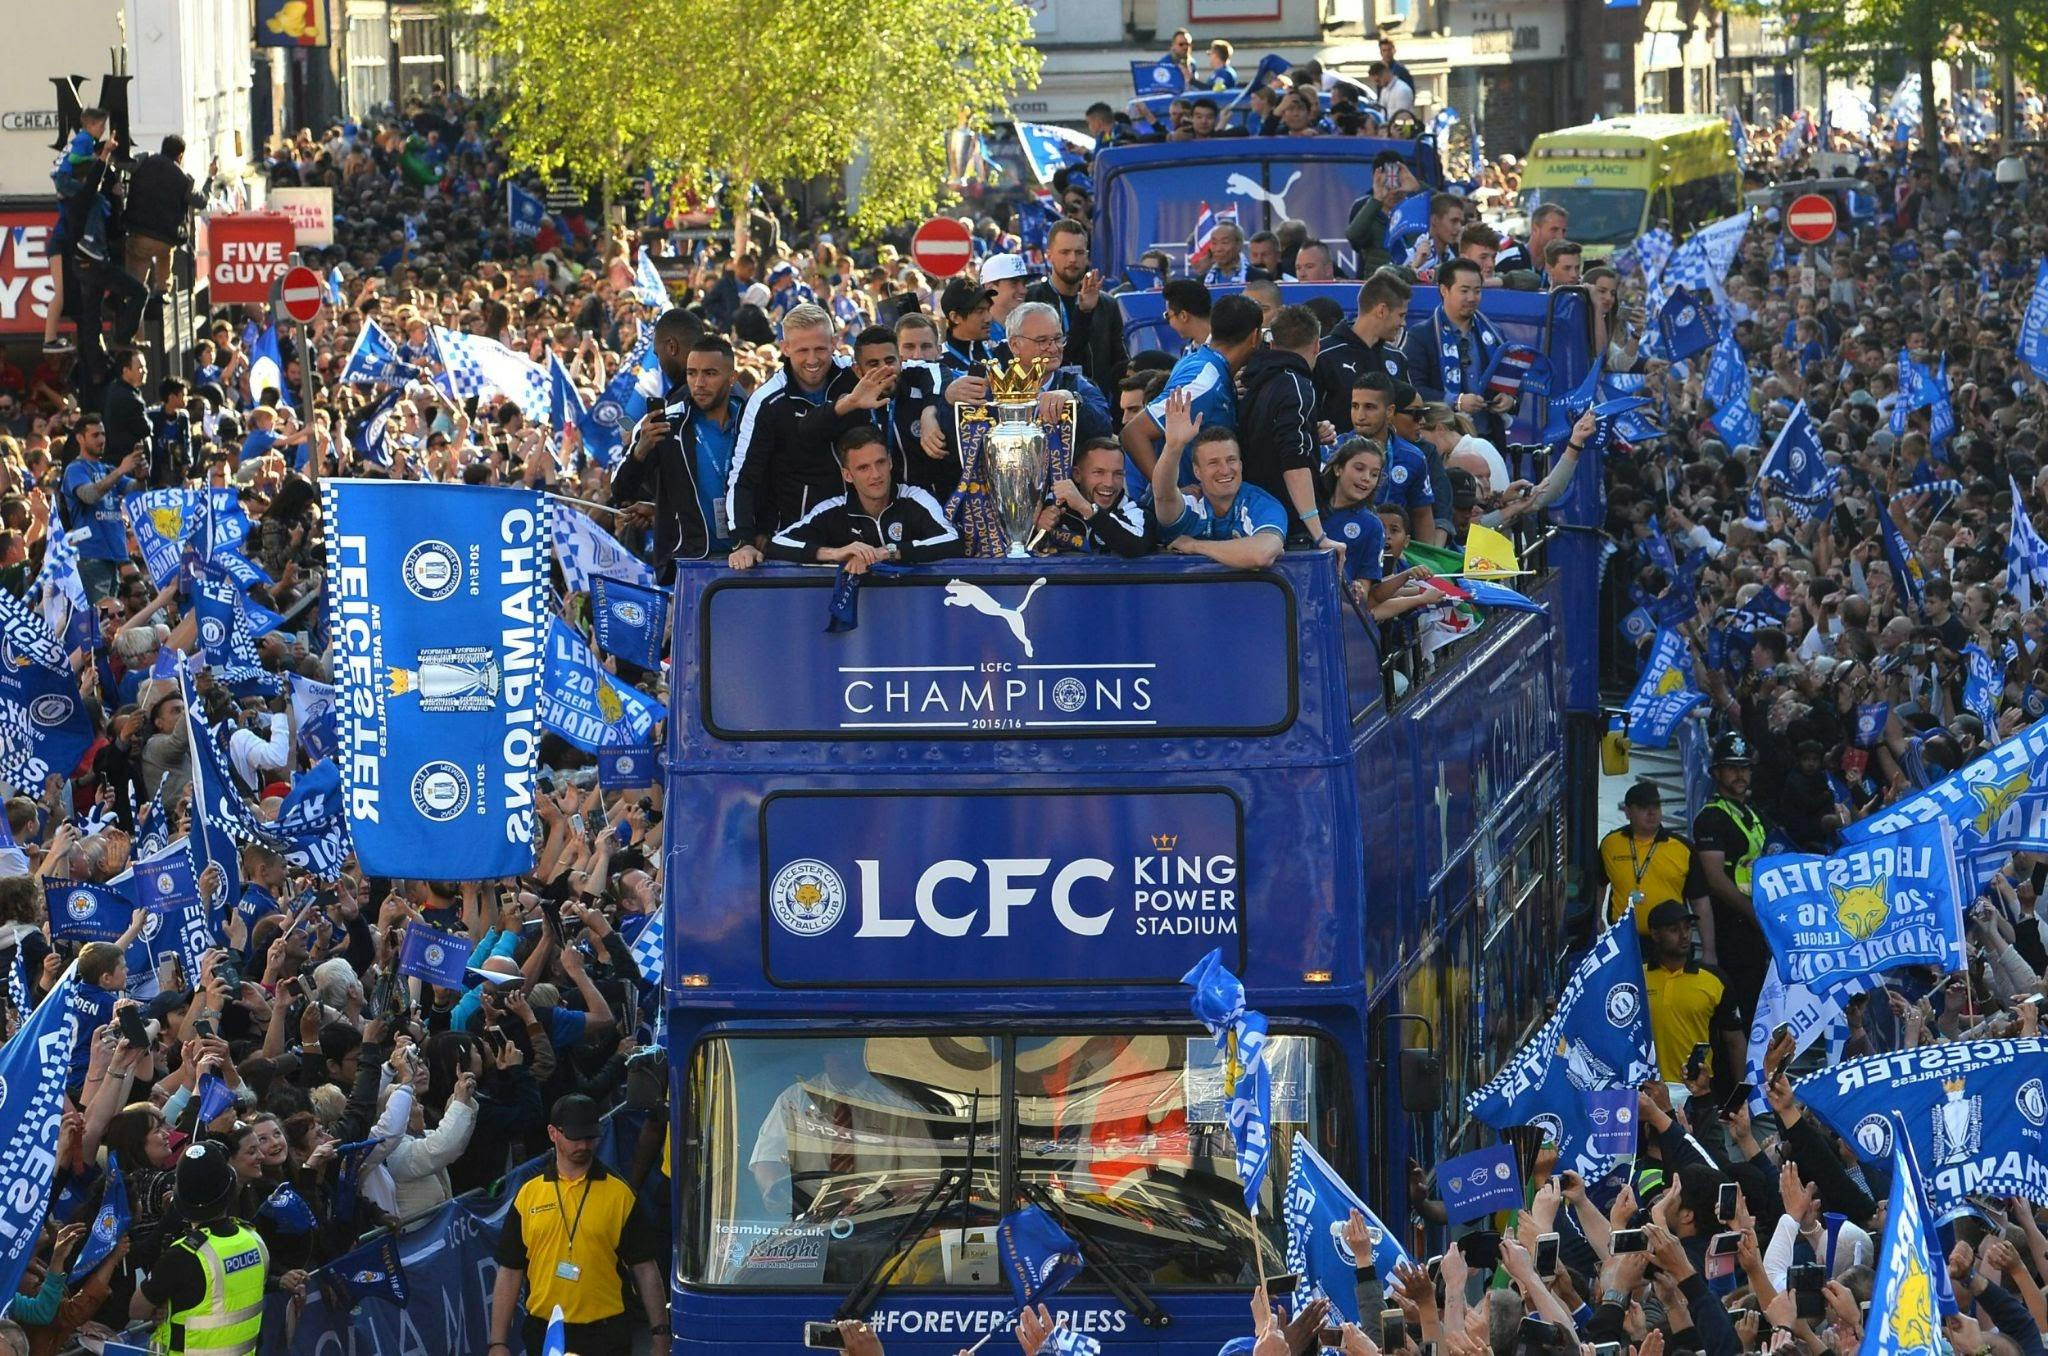 Leicester City parade through the streets to celebrate their historic 2015/16 Premier League win